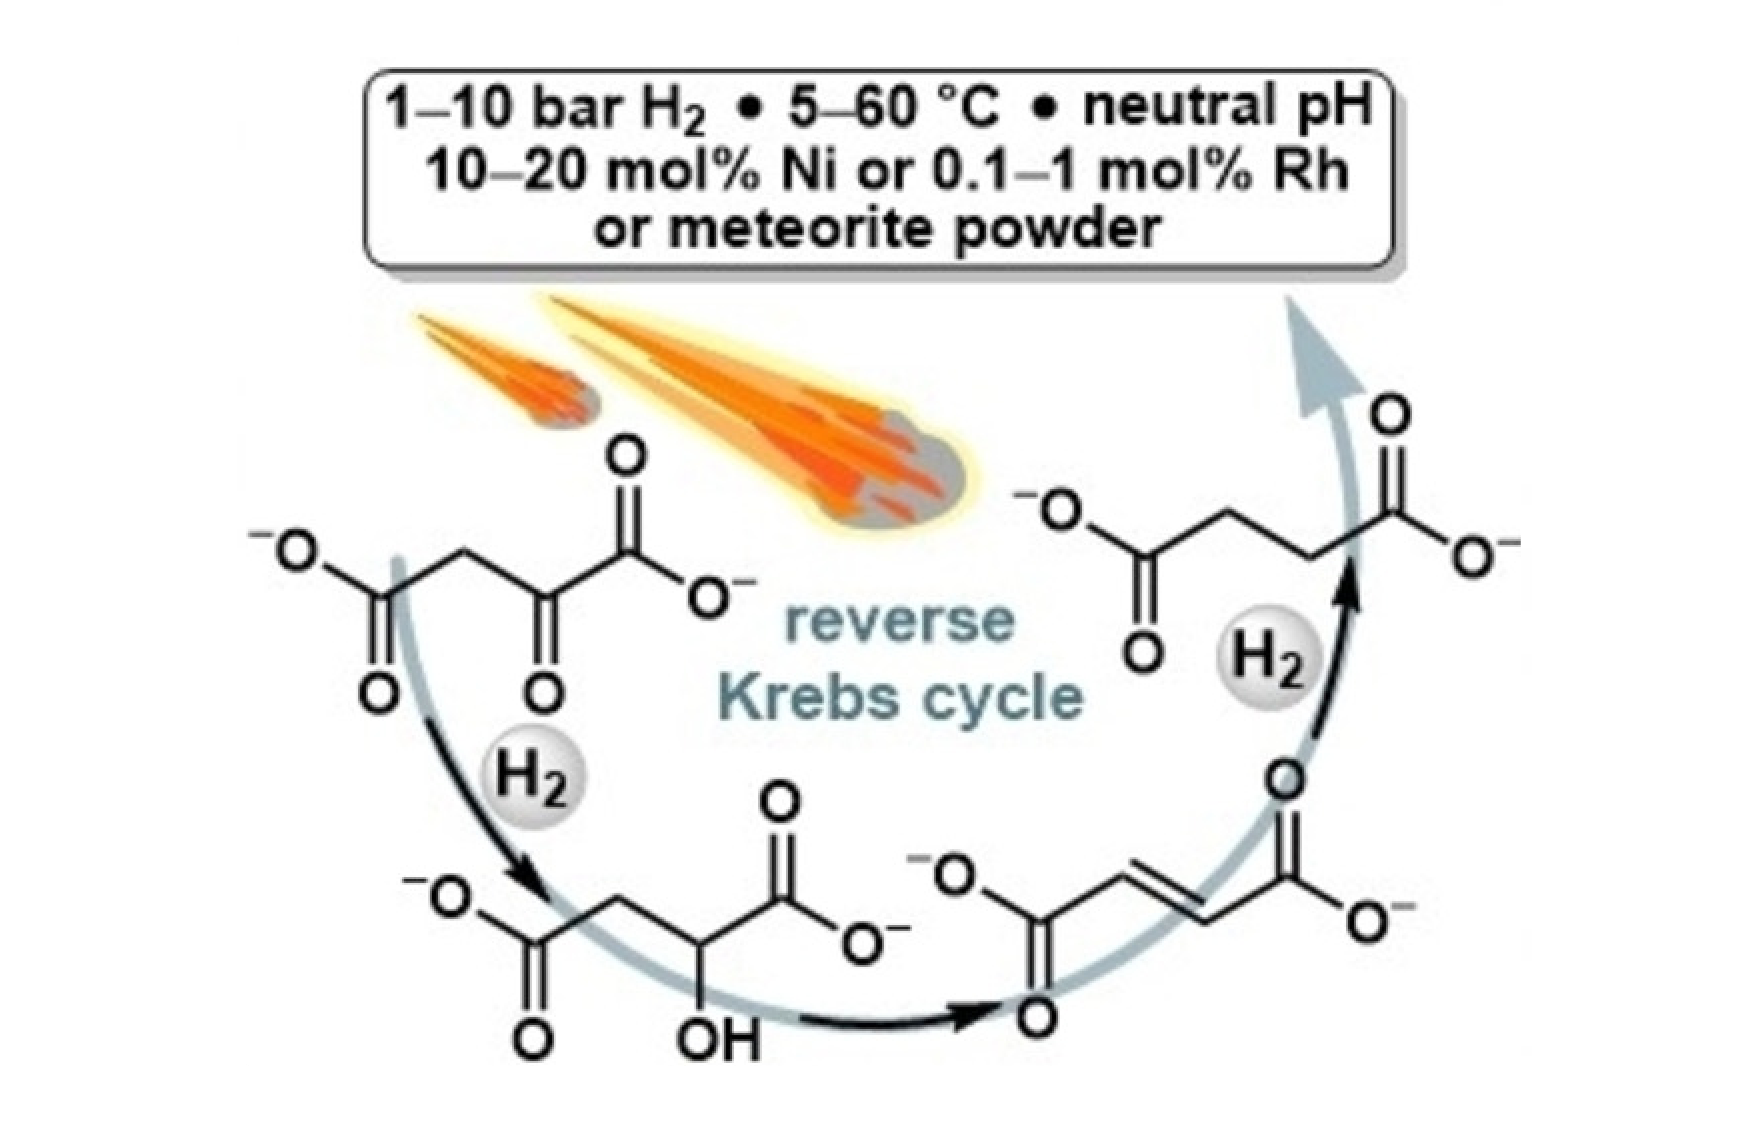 Primeval Reaction Pathways – Some Reactions In The Reverse Krebs Cycle Can Also Be Run Under Meteorite Catalysis